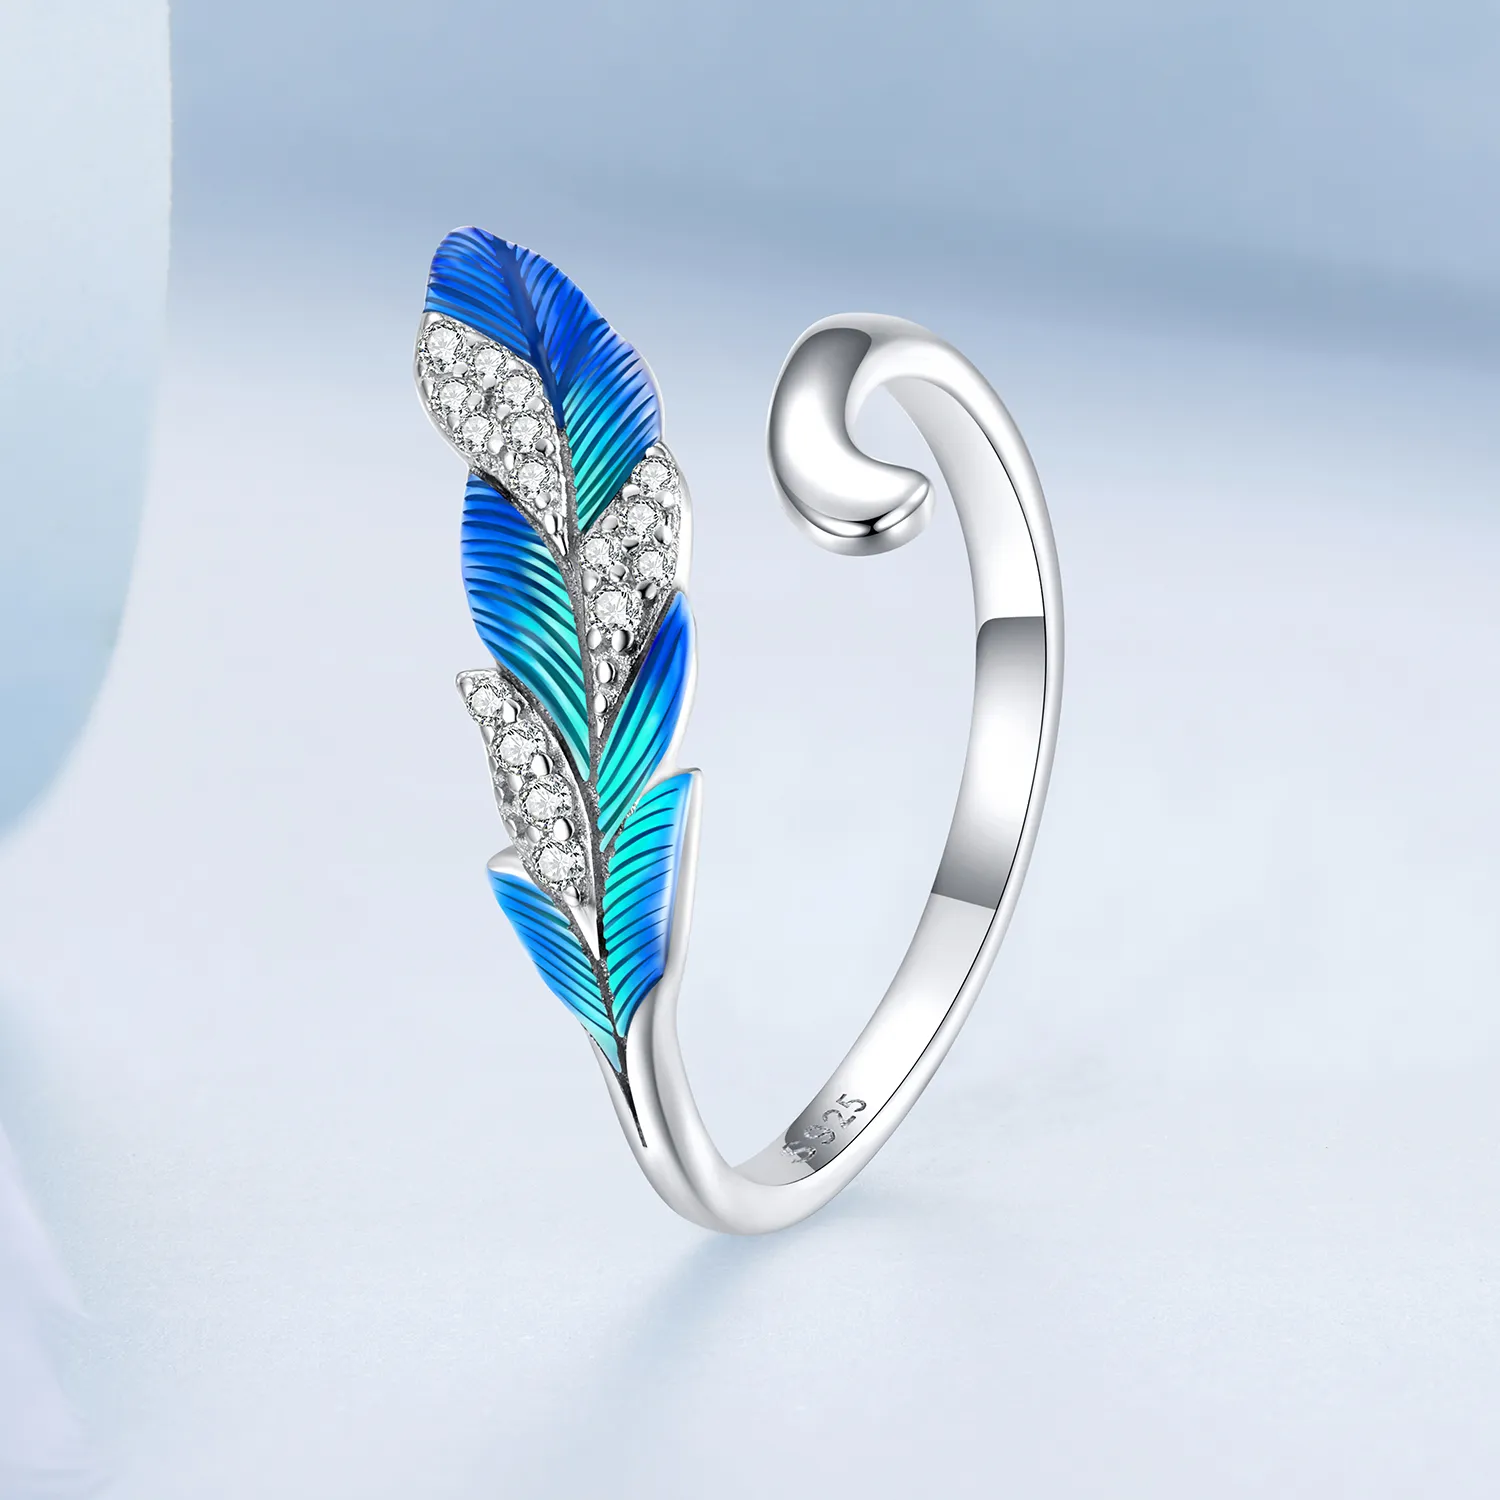 Pandora Style Dazzling Blue Feather Open Ring - BSR301